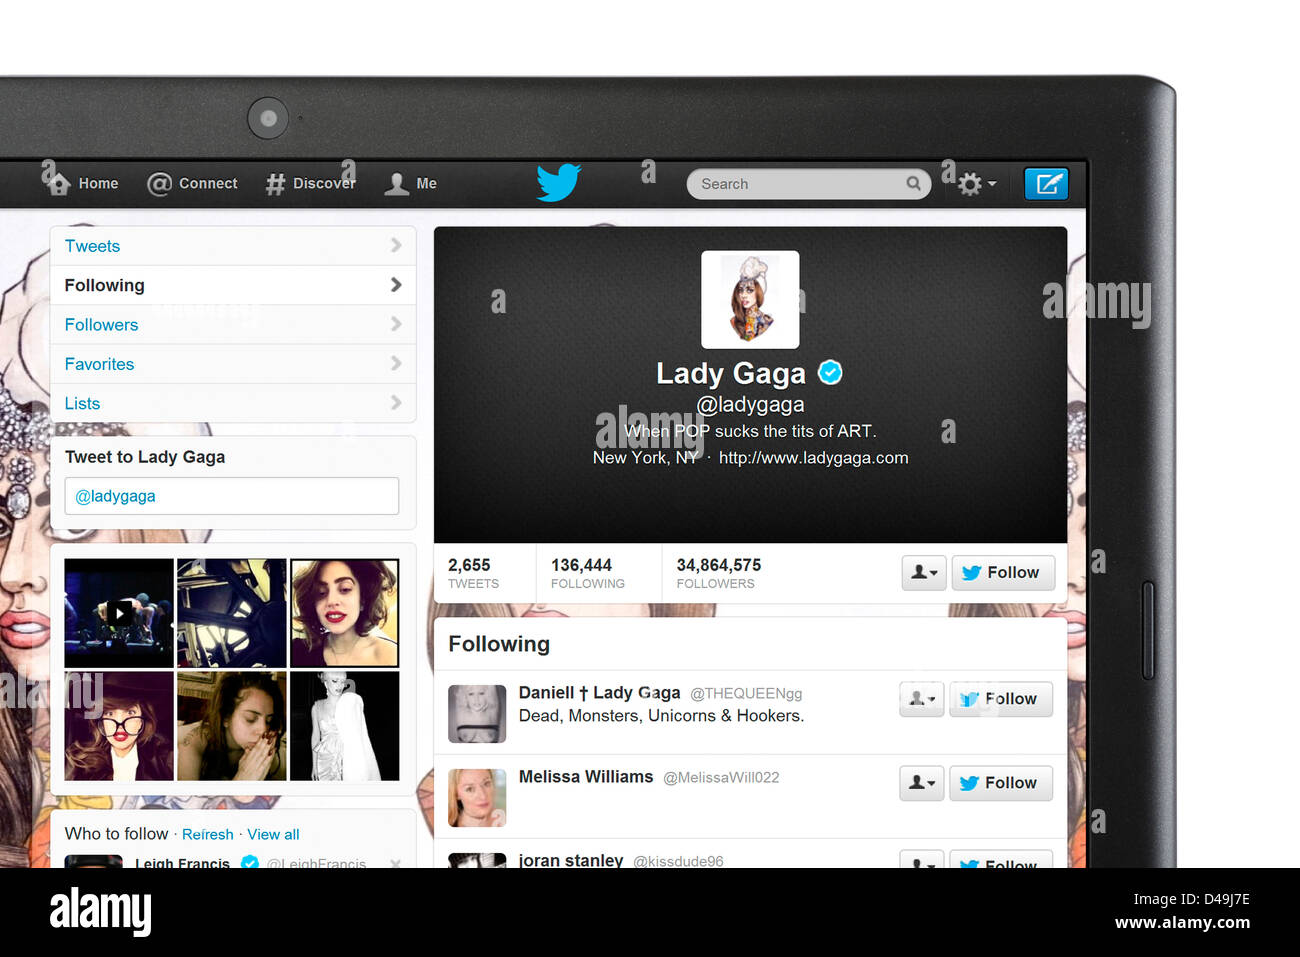 Lady Gaga's Twitter page on a laptop computer Stock Photo